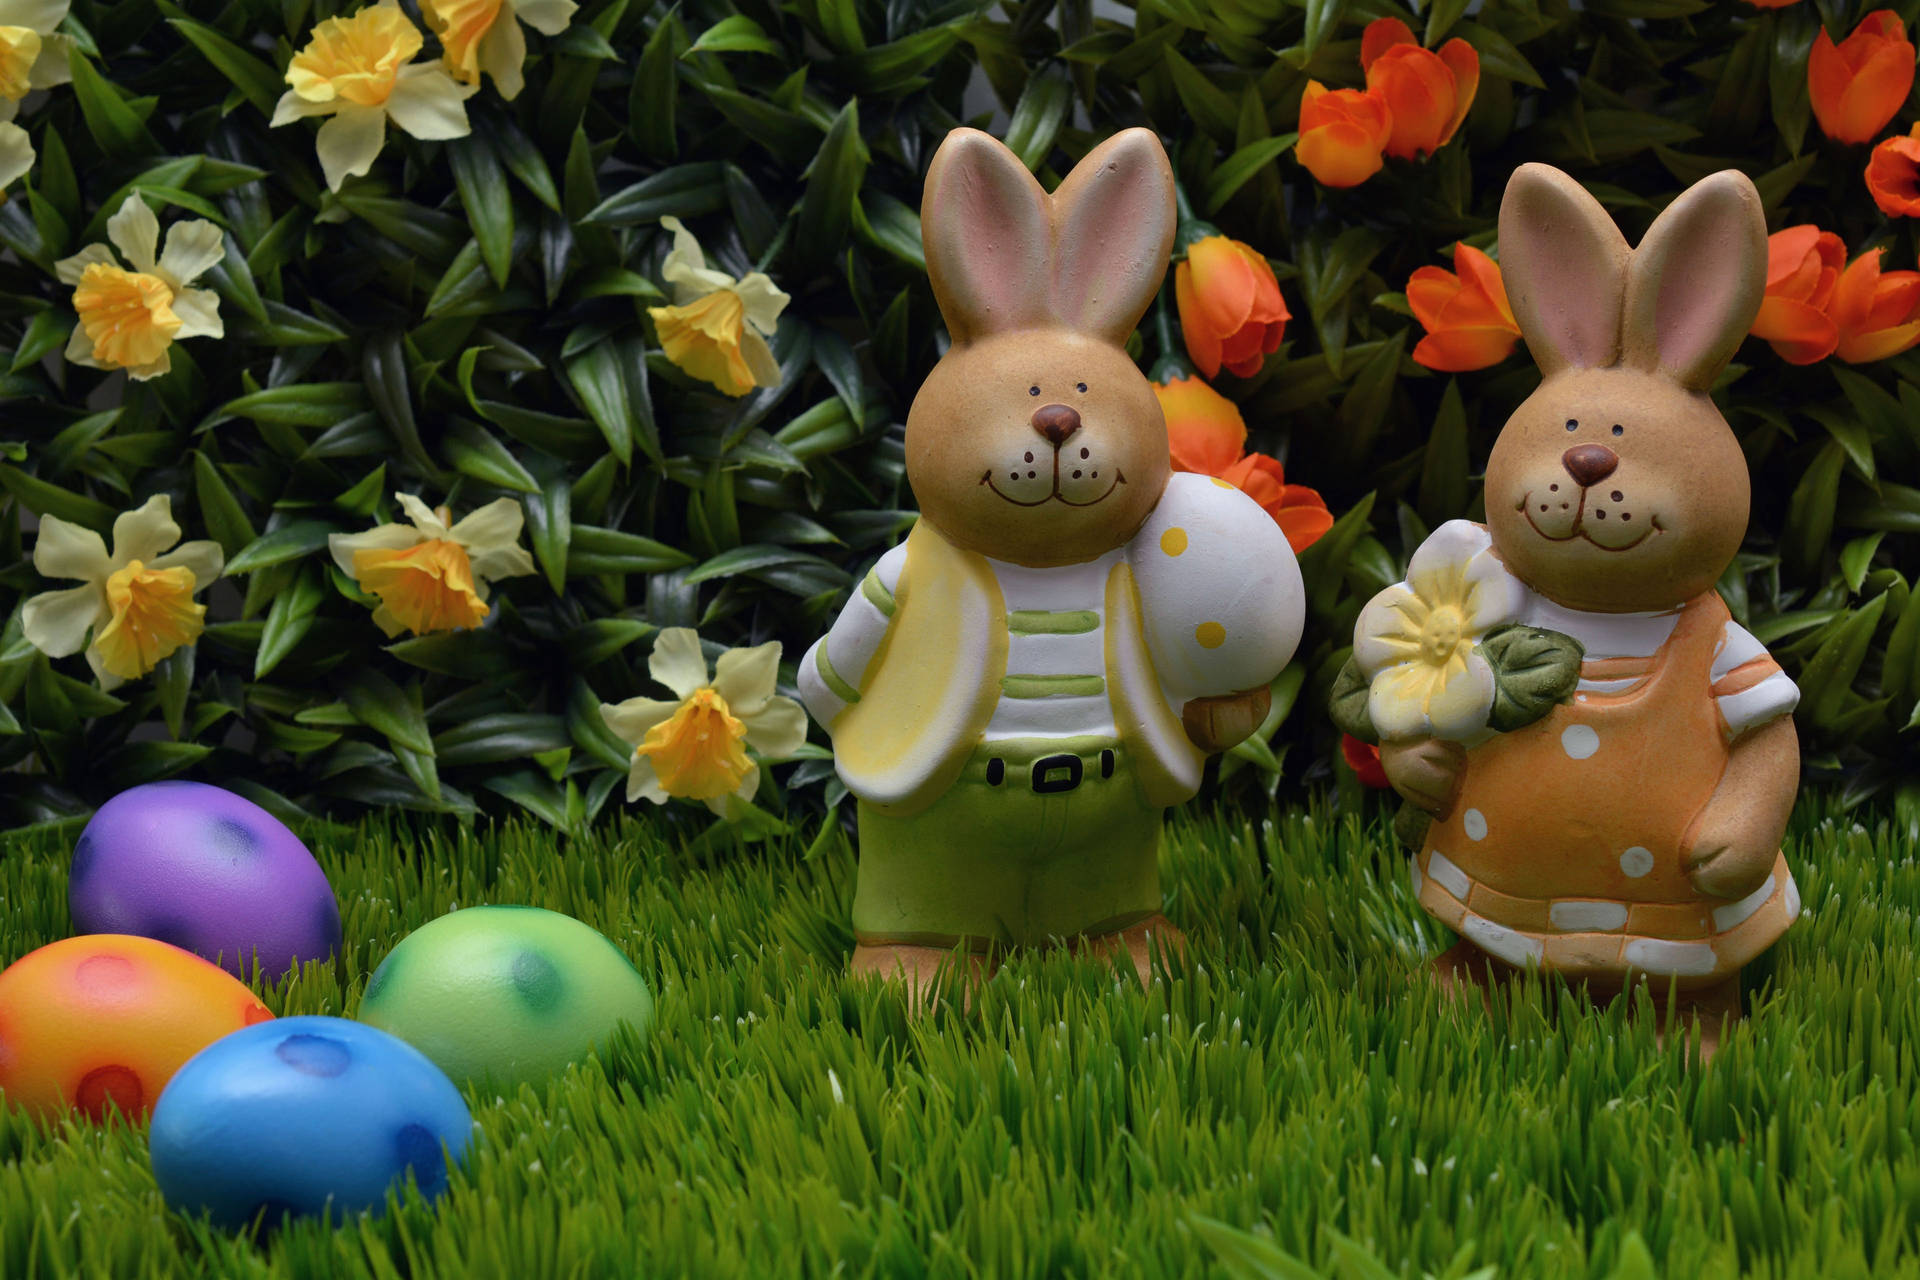 Cute Easter Bunny Statue Background